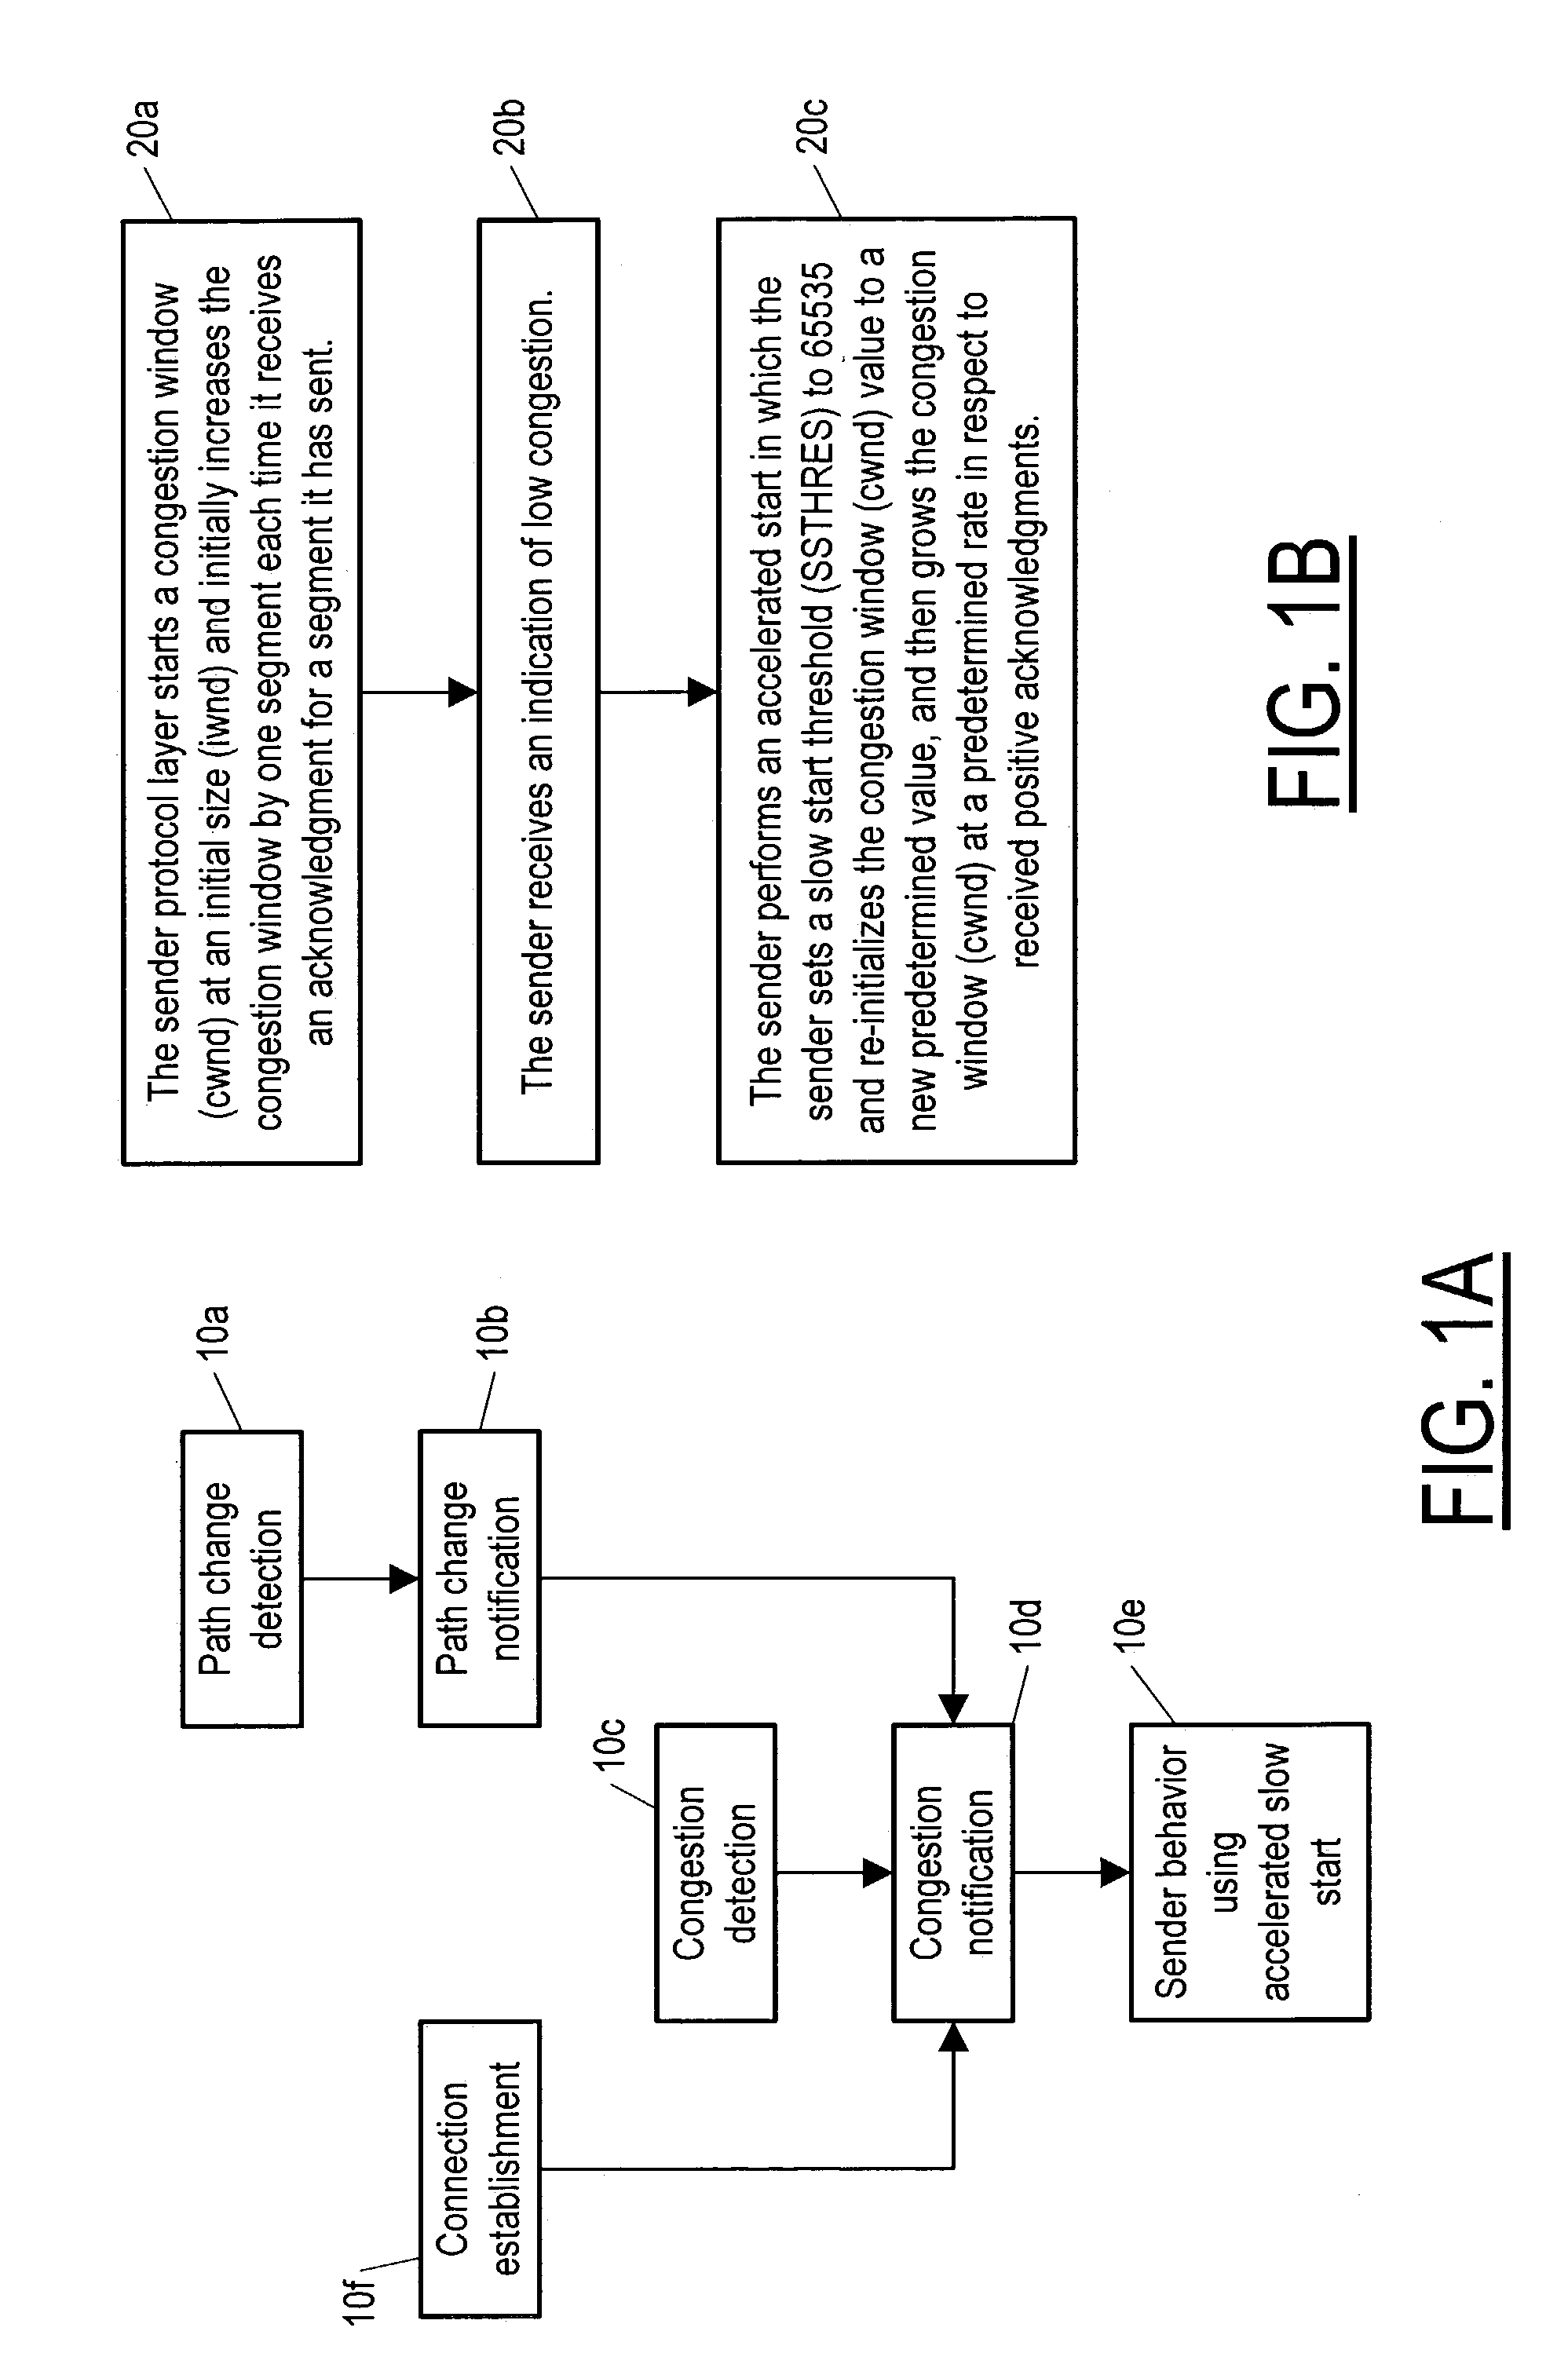 Method and apparatus for accelerating throughput in a wireless or other telecommunication system